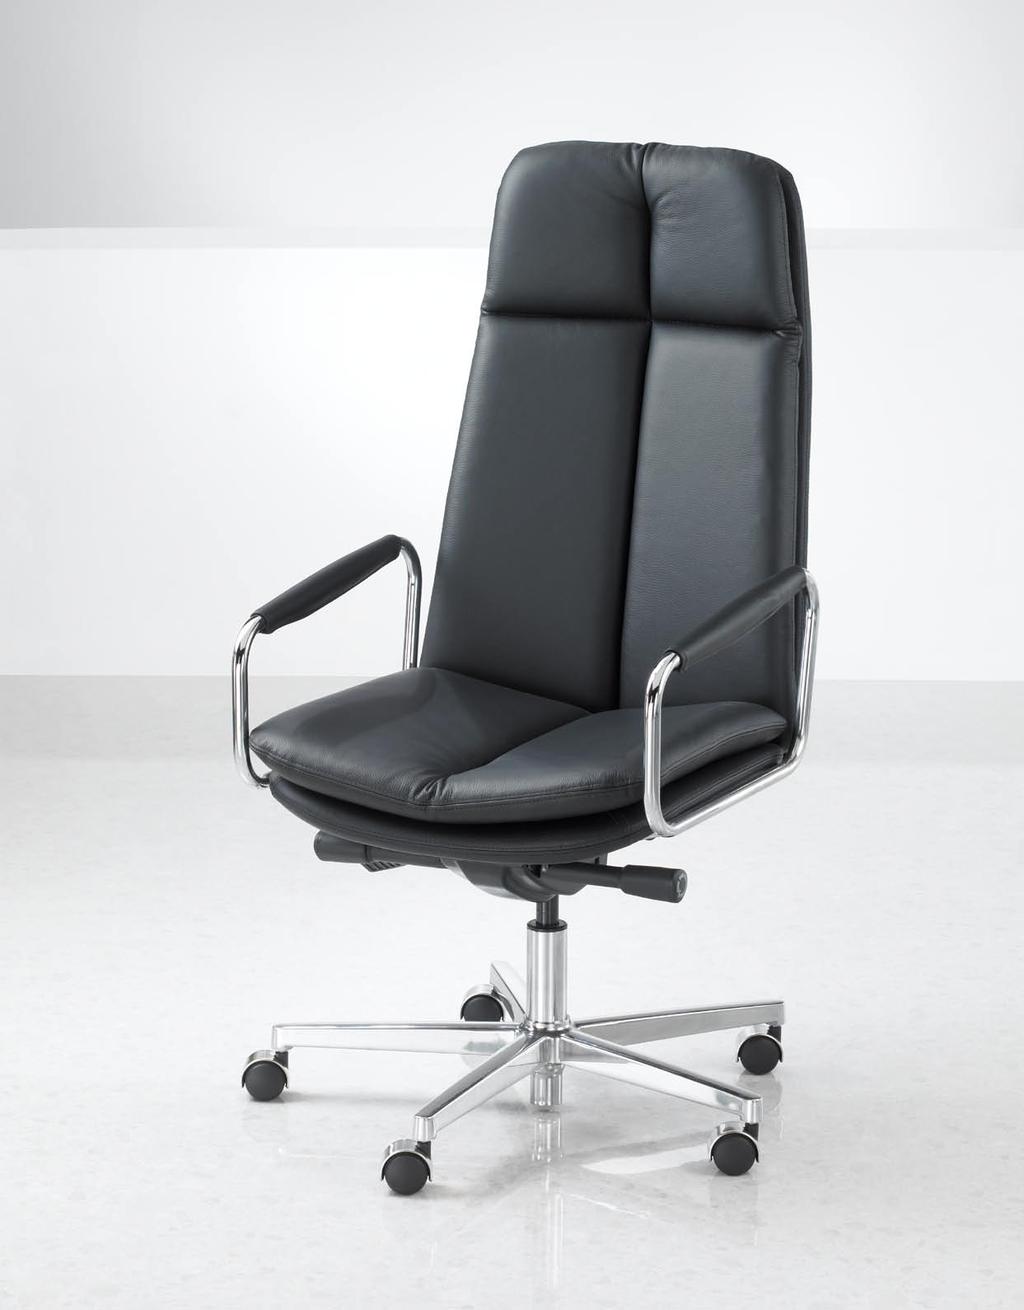 Arms are upholstered in fabric or leather to match the seat and